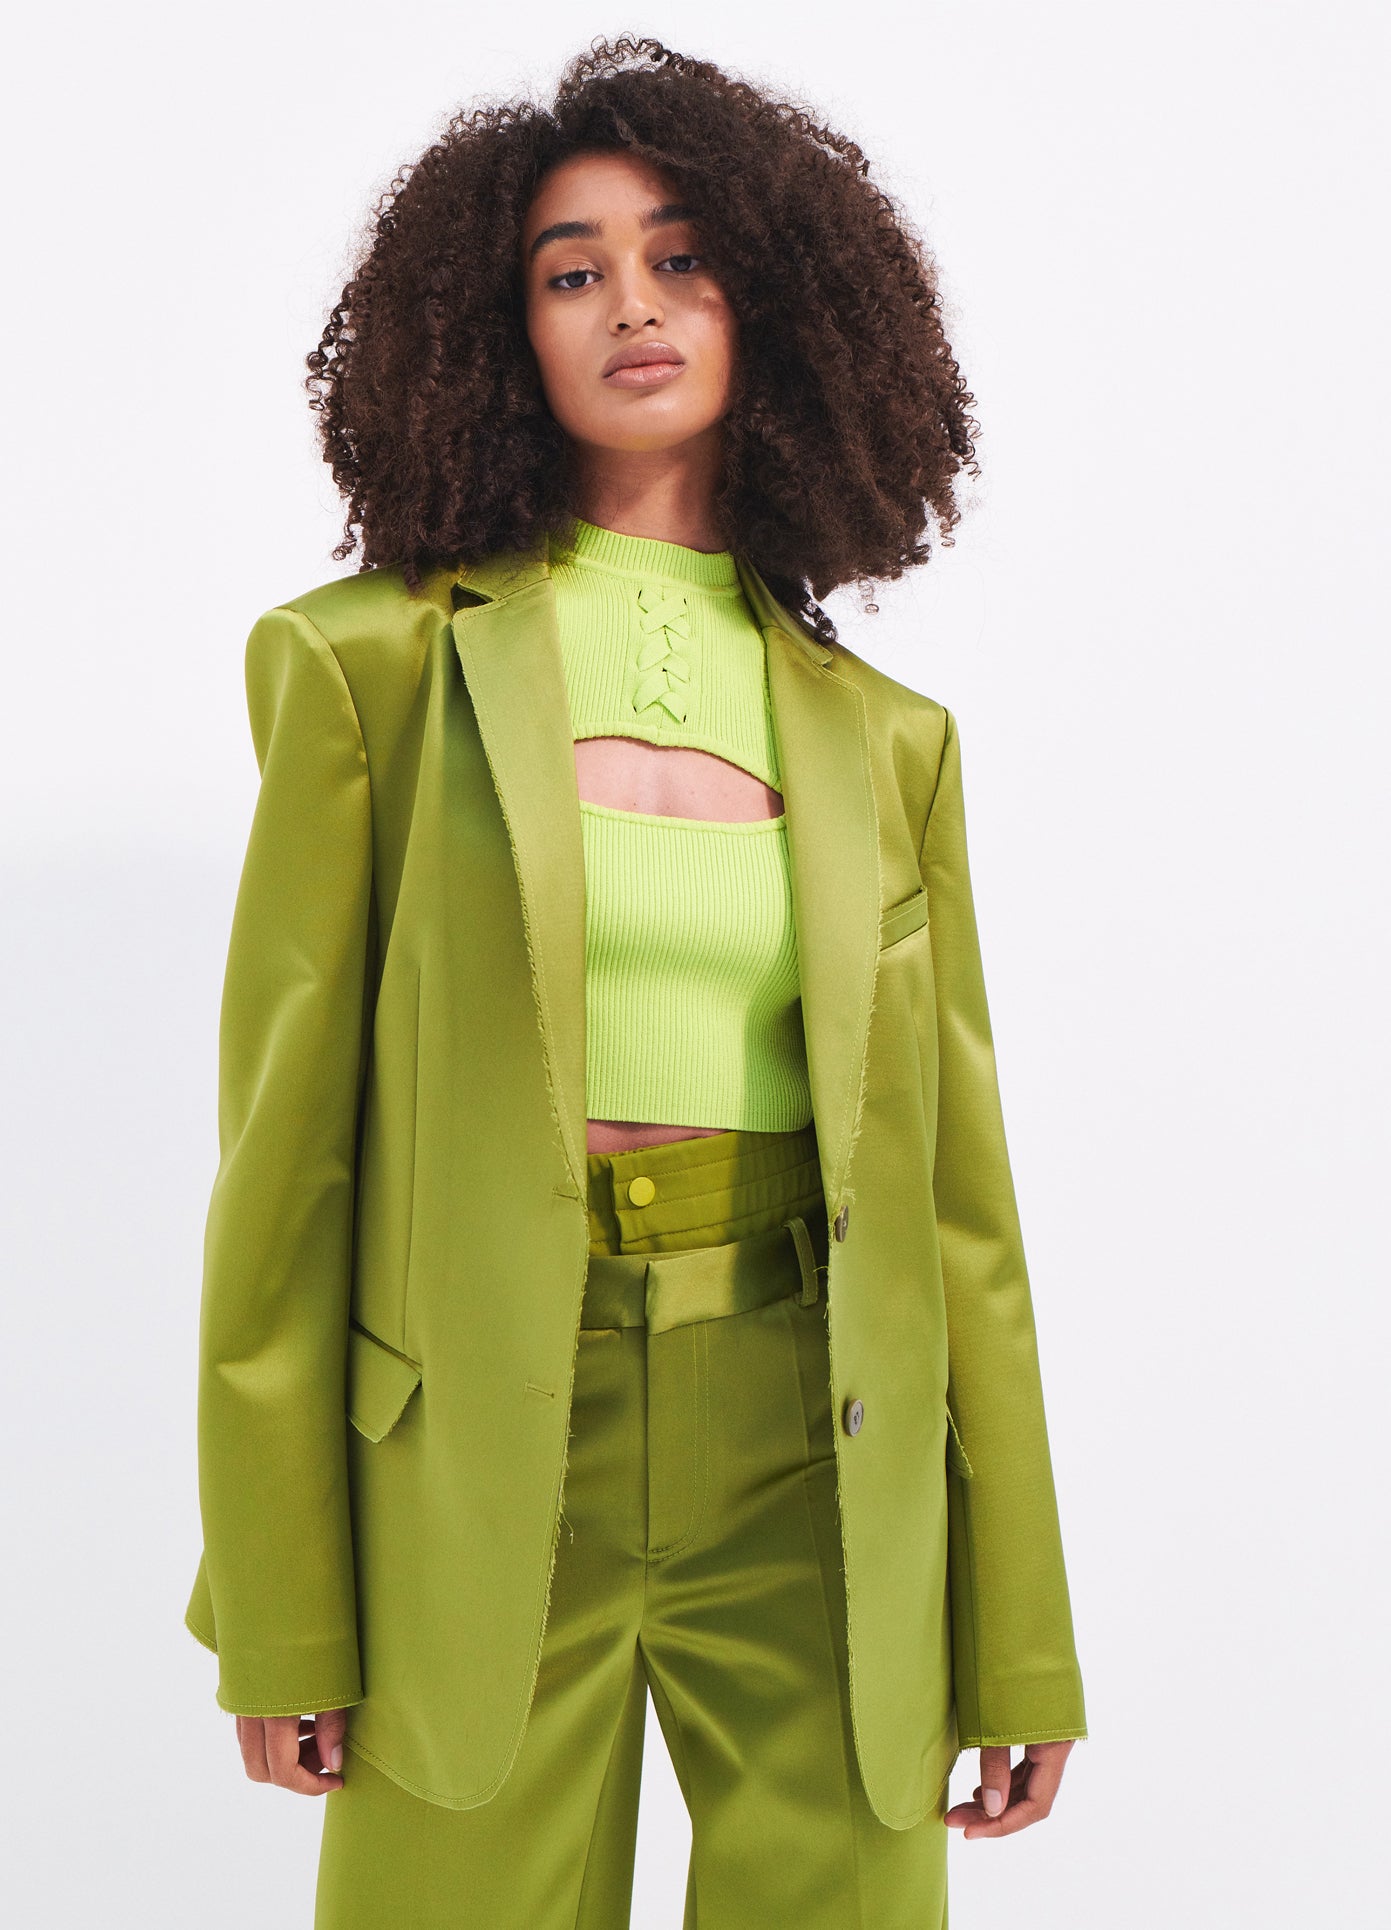 MONSE Satin Raw Edge Boxy Blazer in Olive on model front view